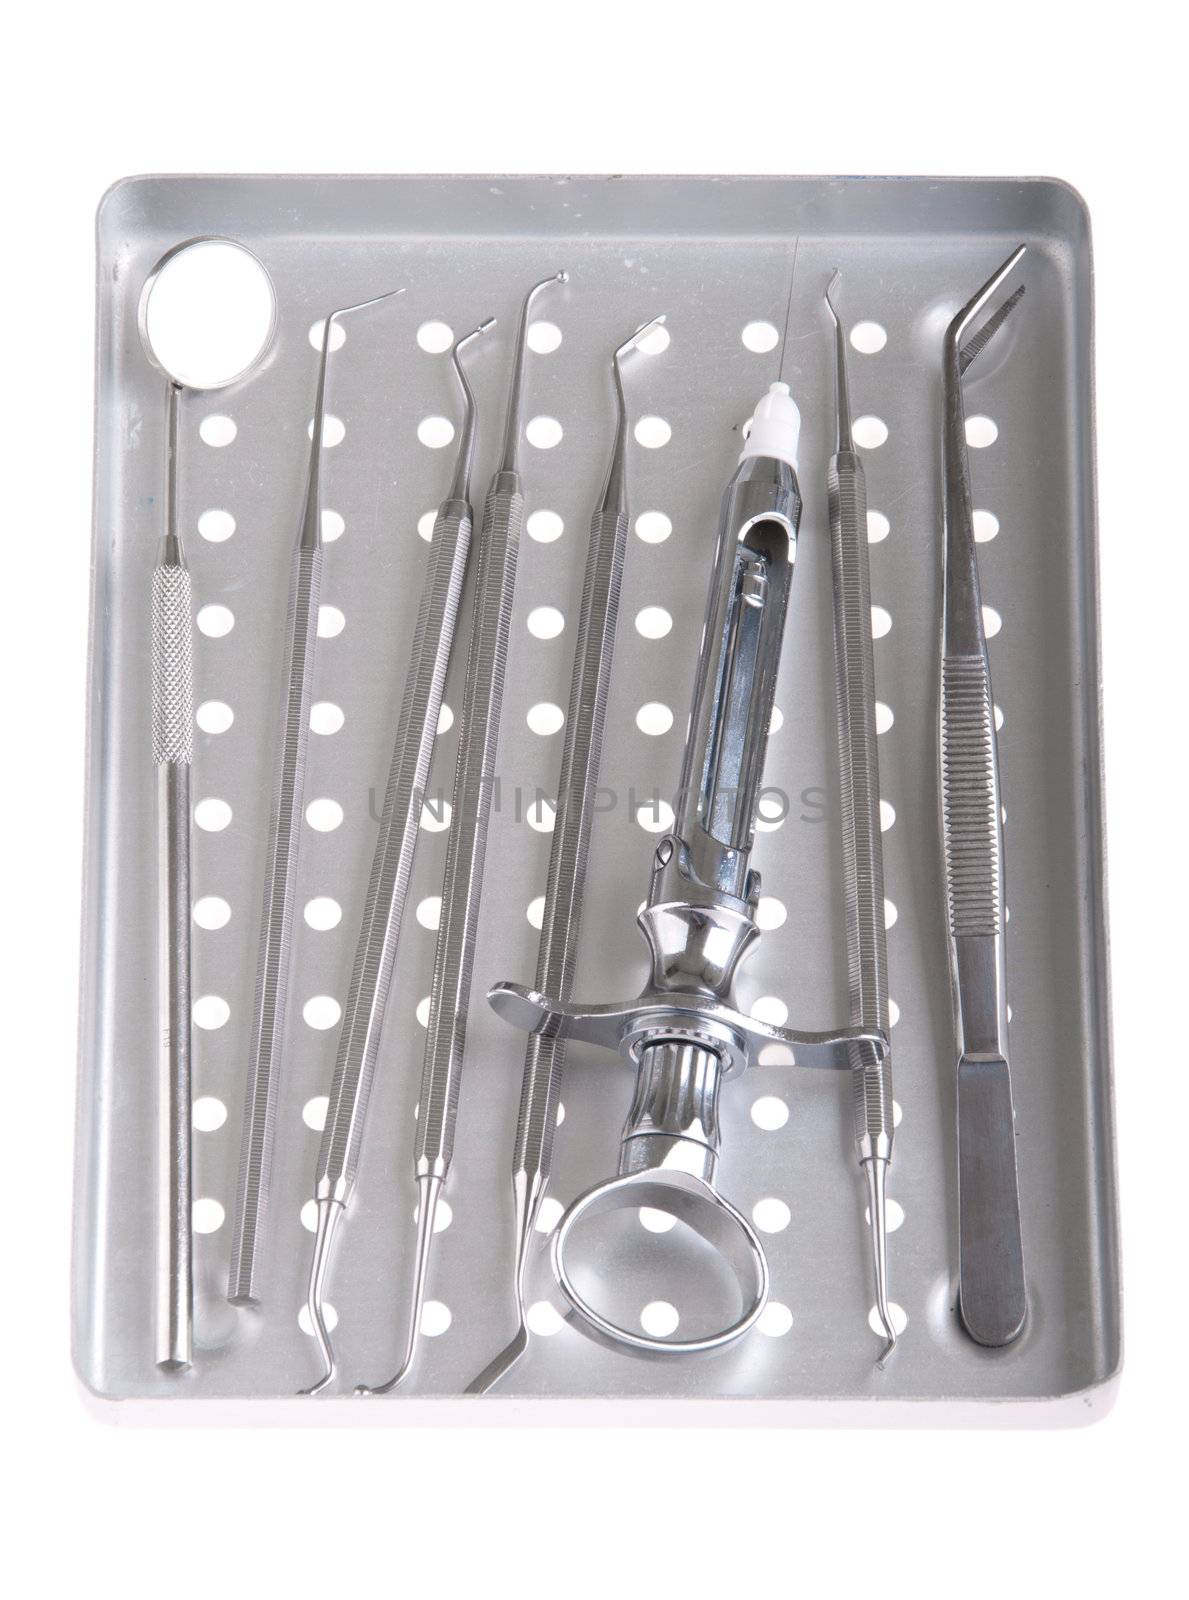 dentistry kit in a metal tray (surgery instruments)